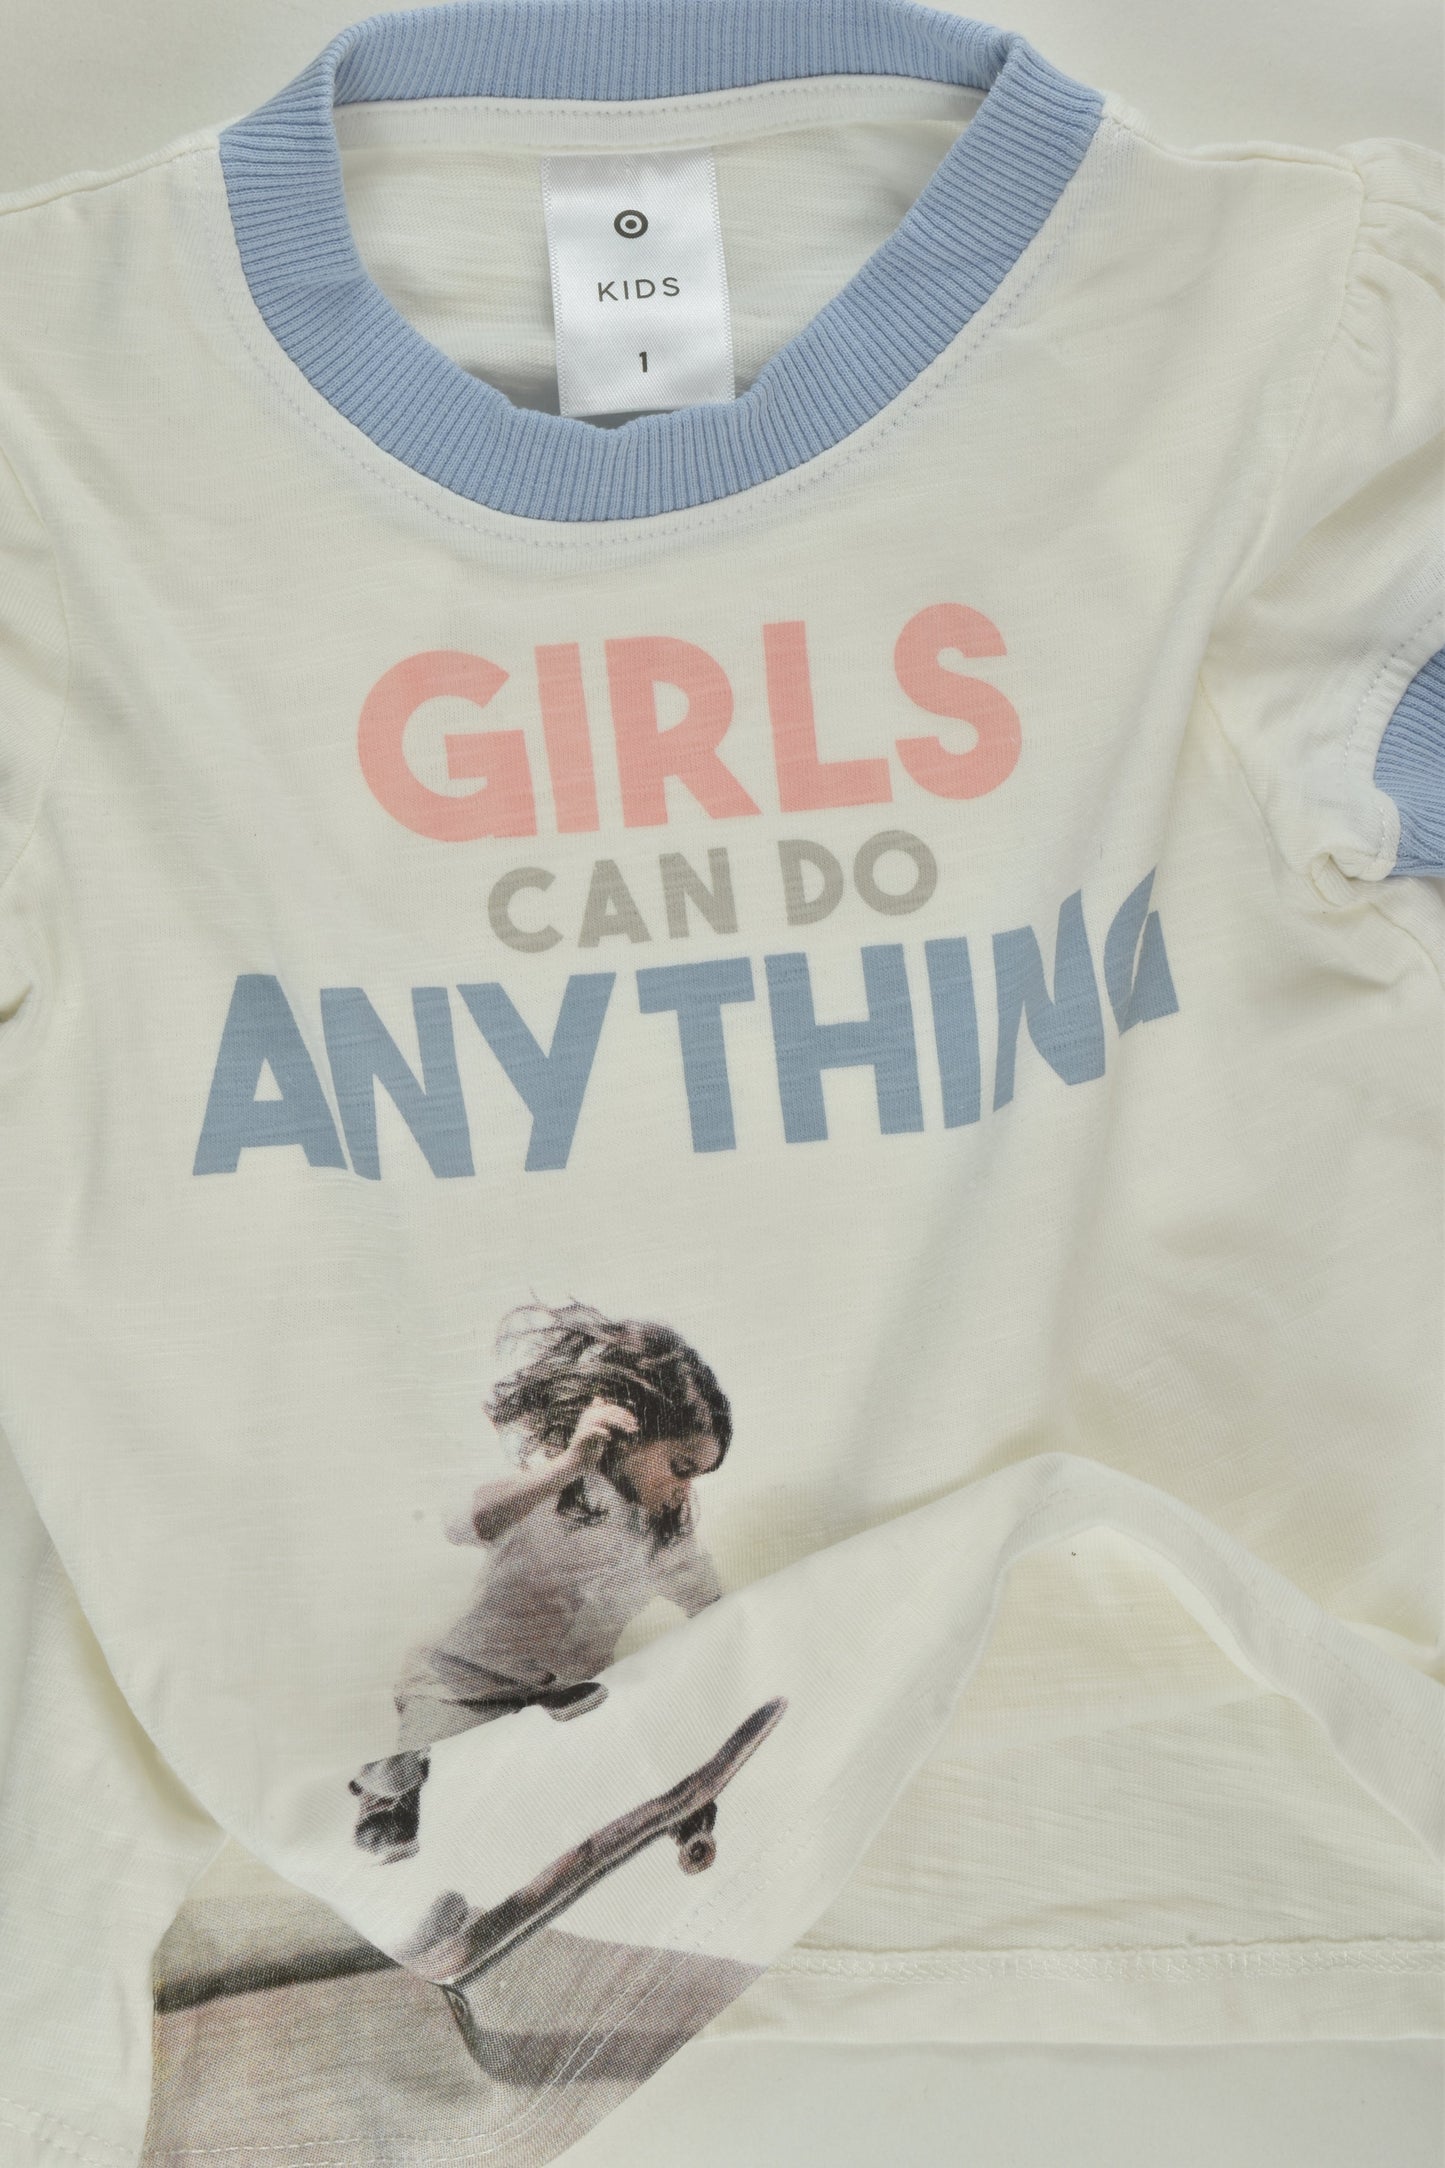 Target Size 1 'Girls Can Do Anything' T-shirt